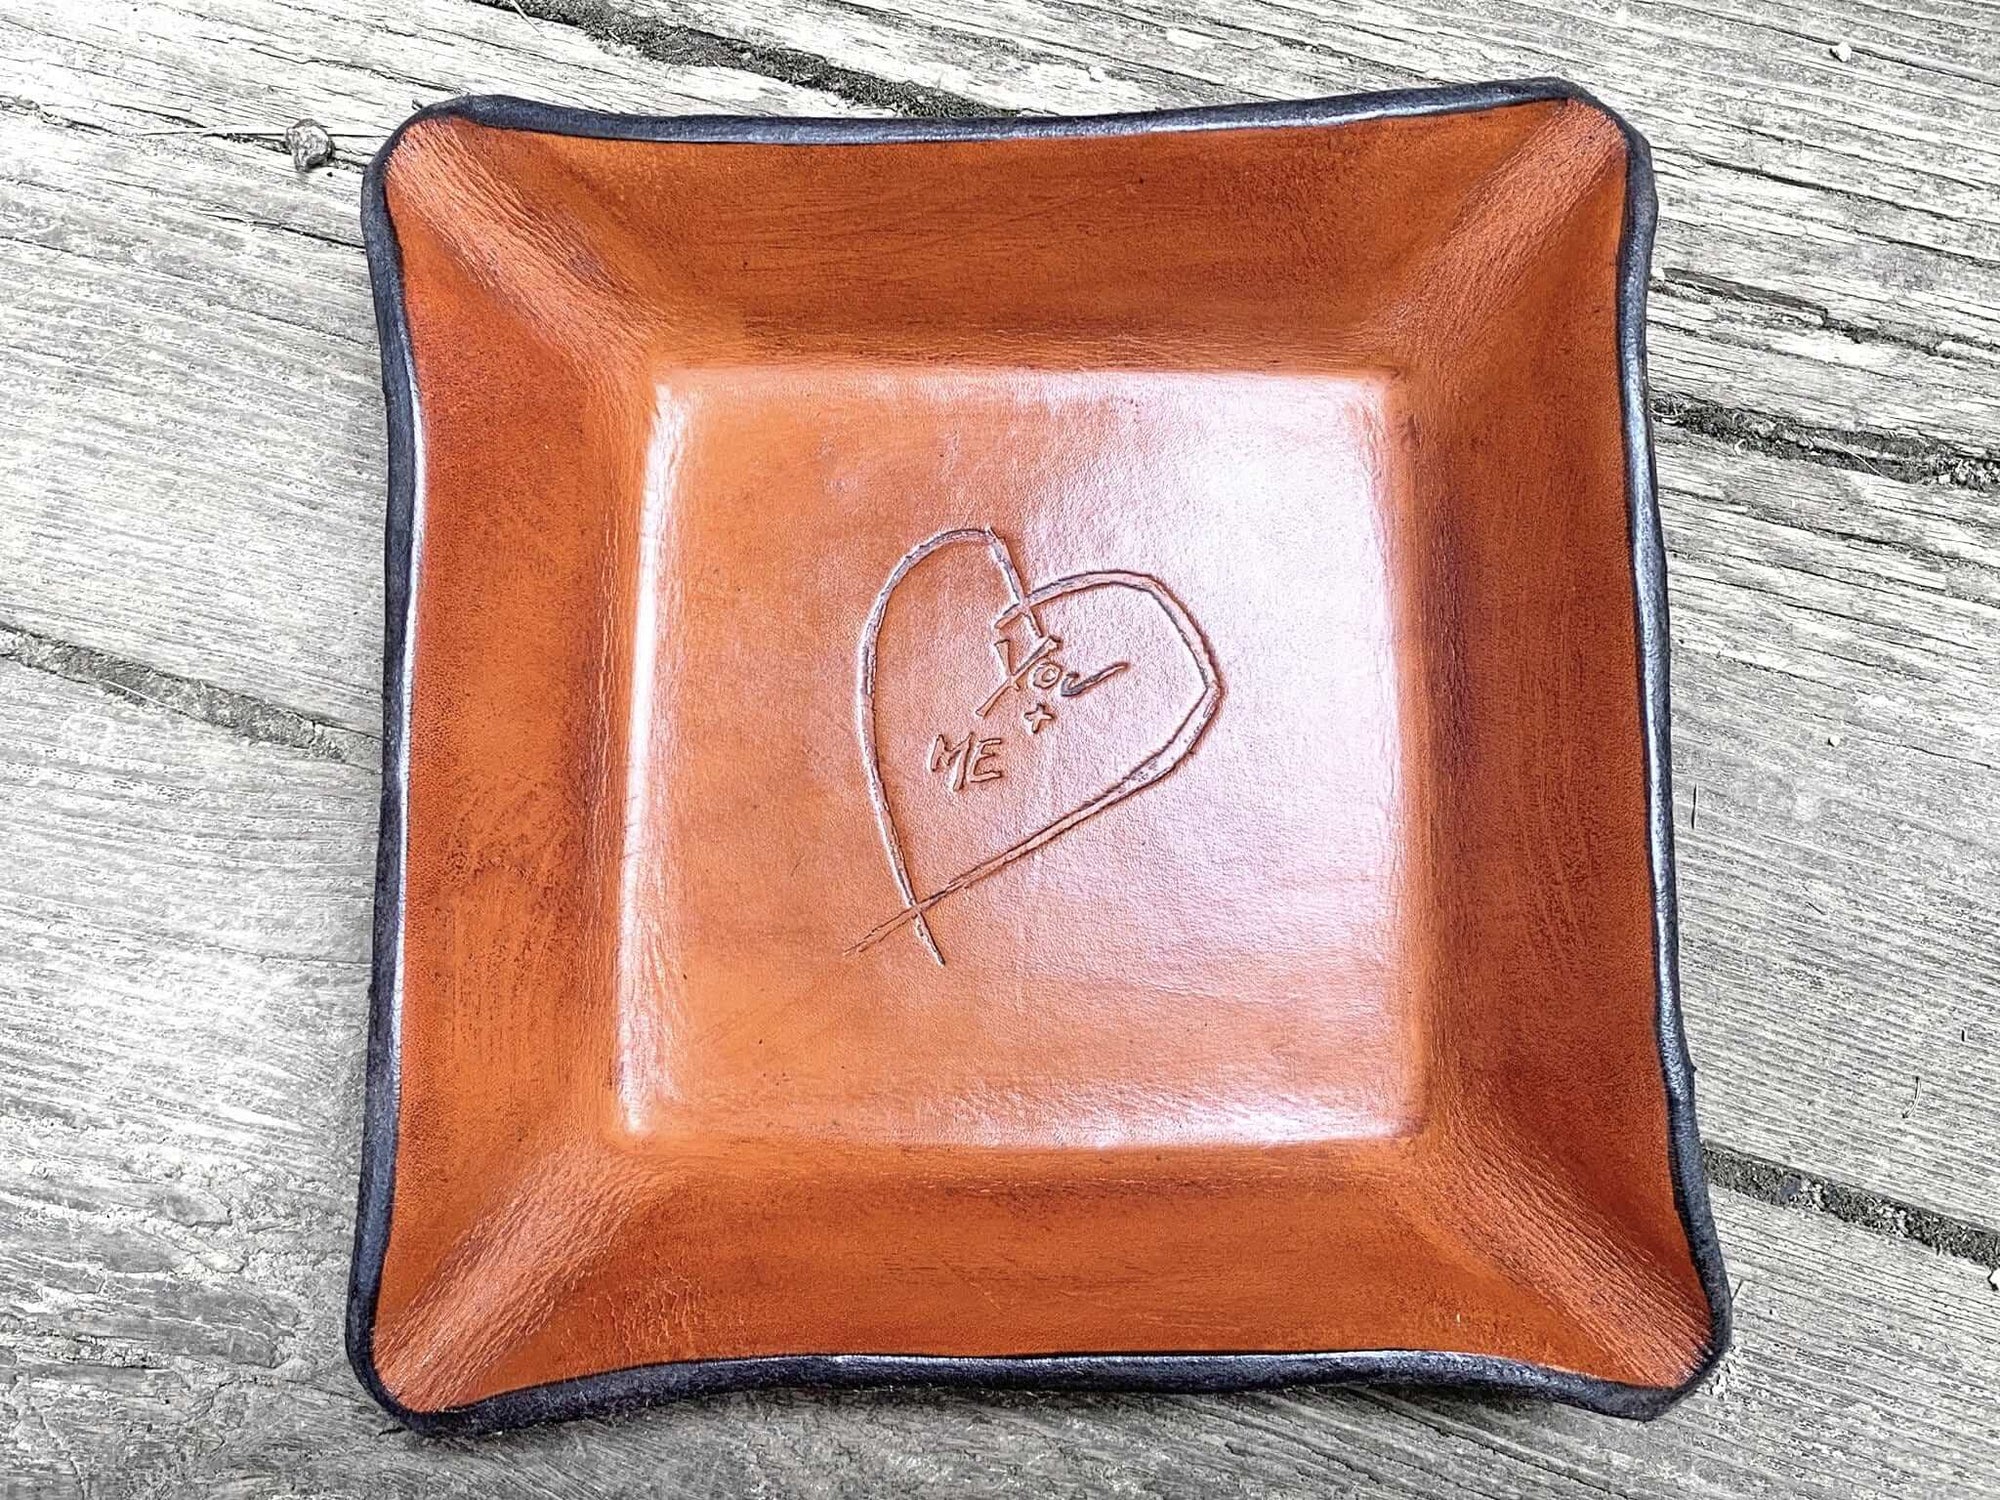 3rd Anniversary Gift Leather Tray. Distressed Leather Valet with Heart.